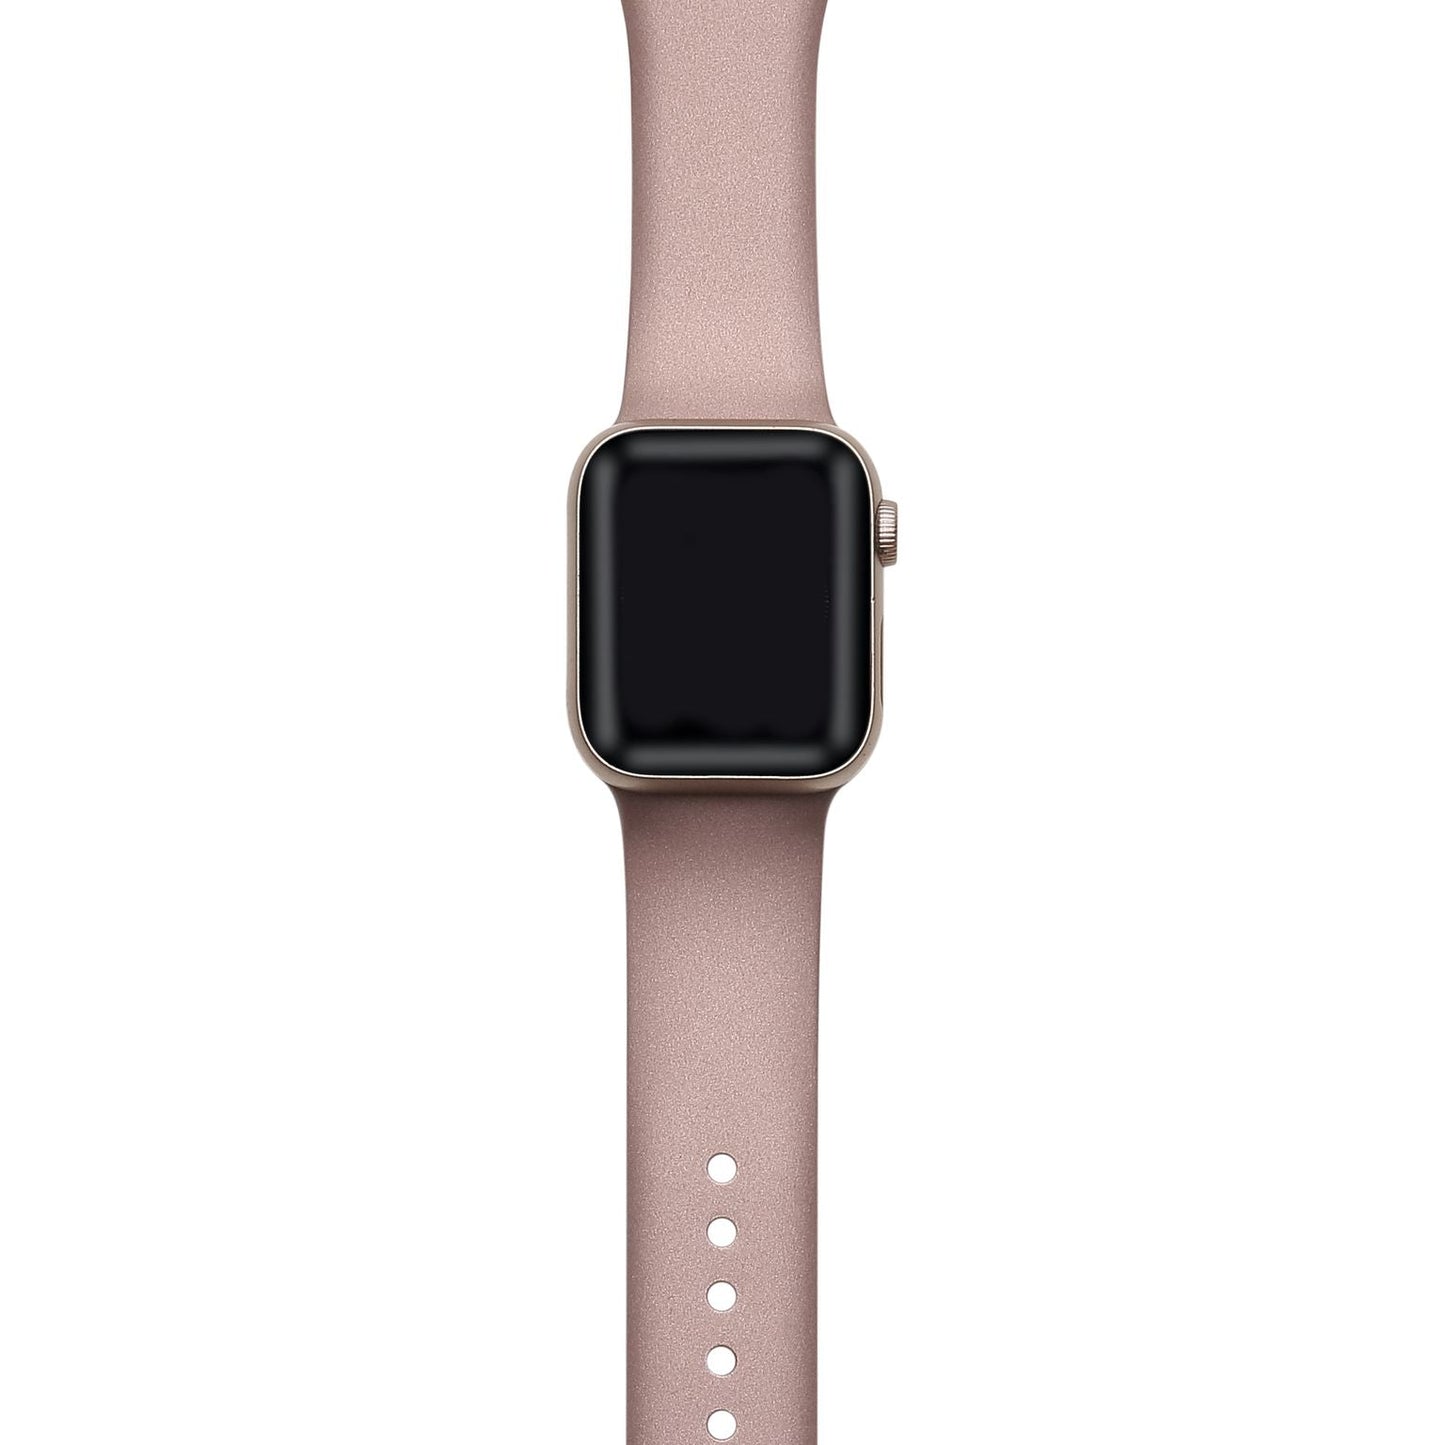 Metallic Silicone Band for Apple Watch